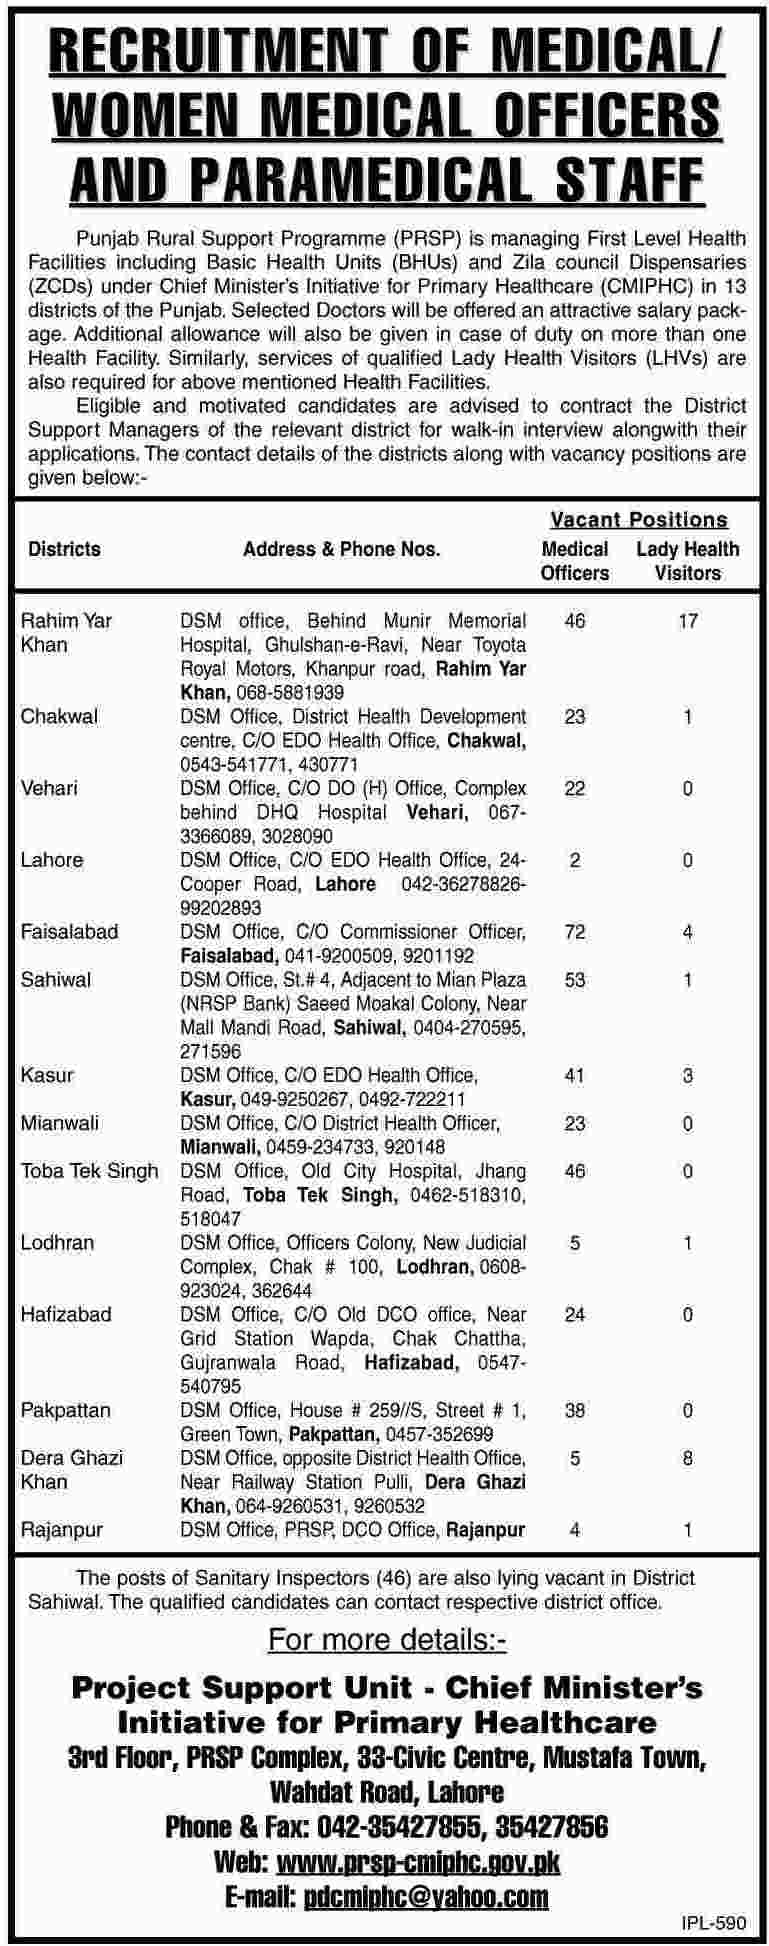 Medical Officers (Male and Female) and Paramedical Staff Required by PRSP